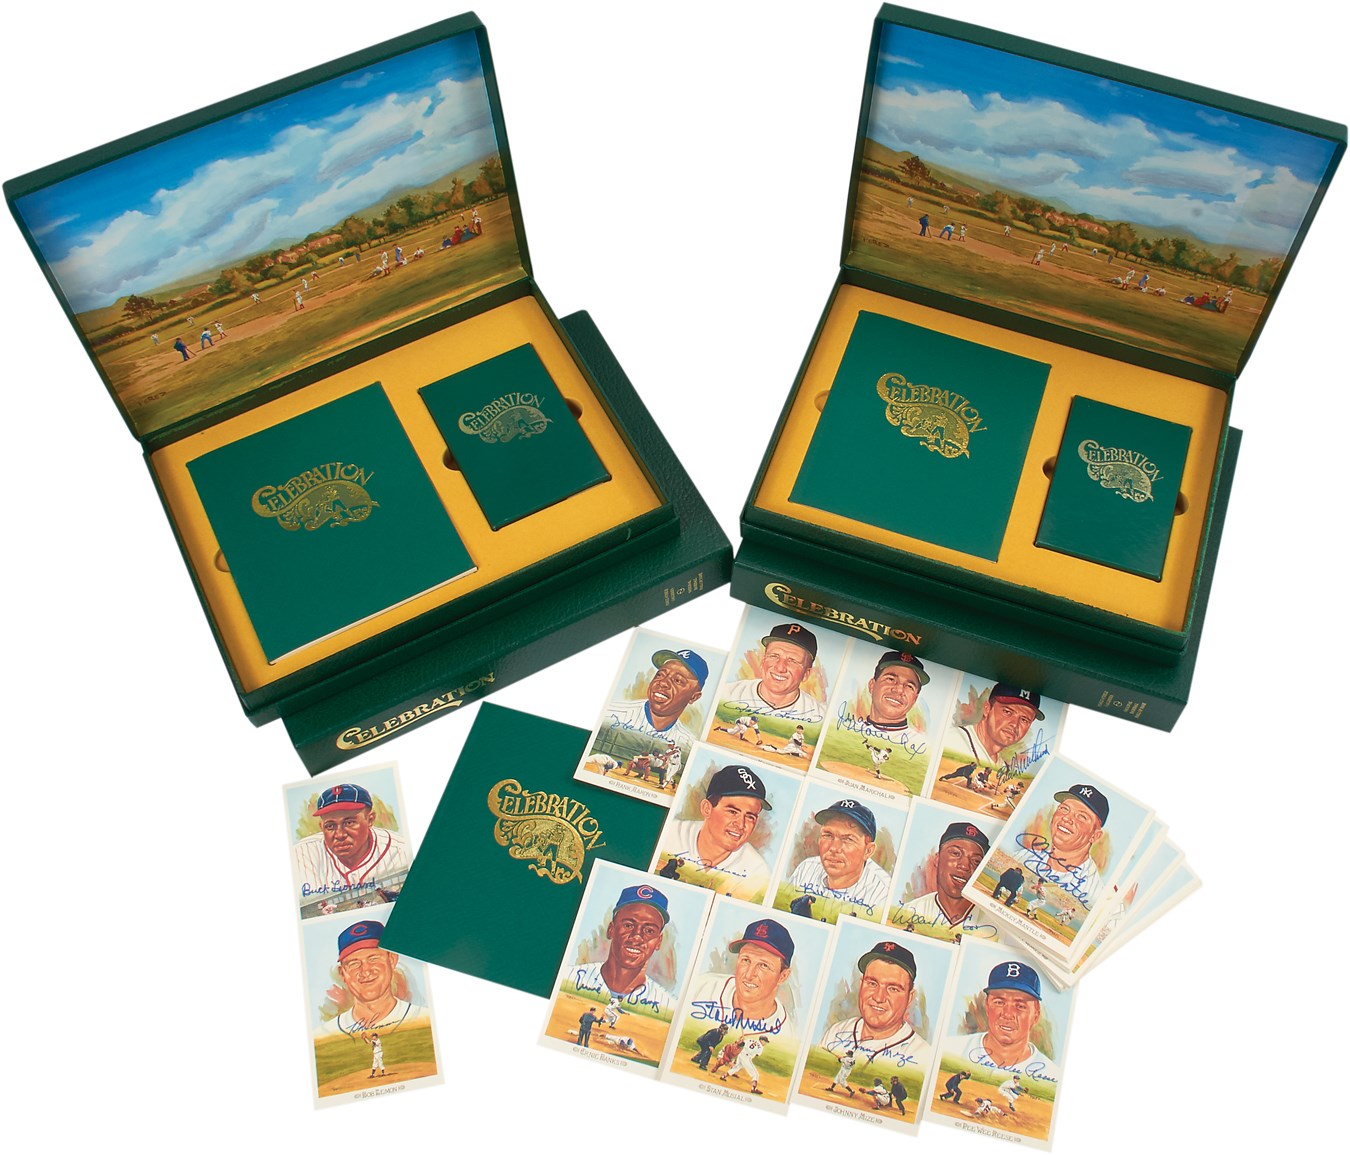 Baseball Autographs - 1989 Perez-Steele Celebration Set Signed with 40/44 Possible Signees Plus Two Unsigned Sets (3)